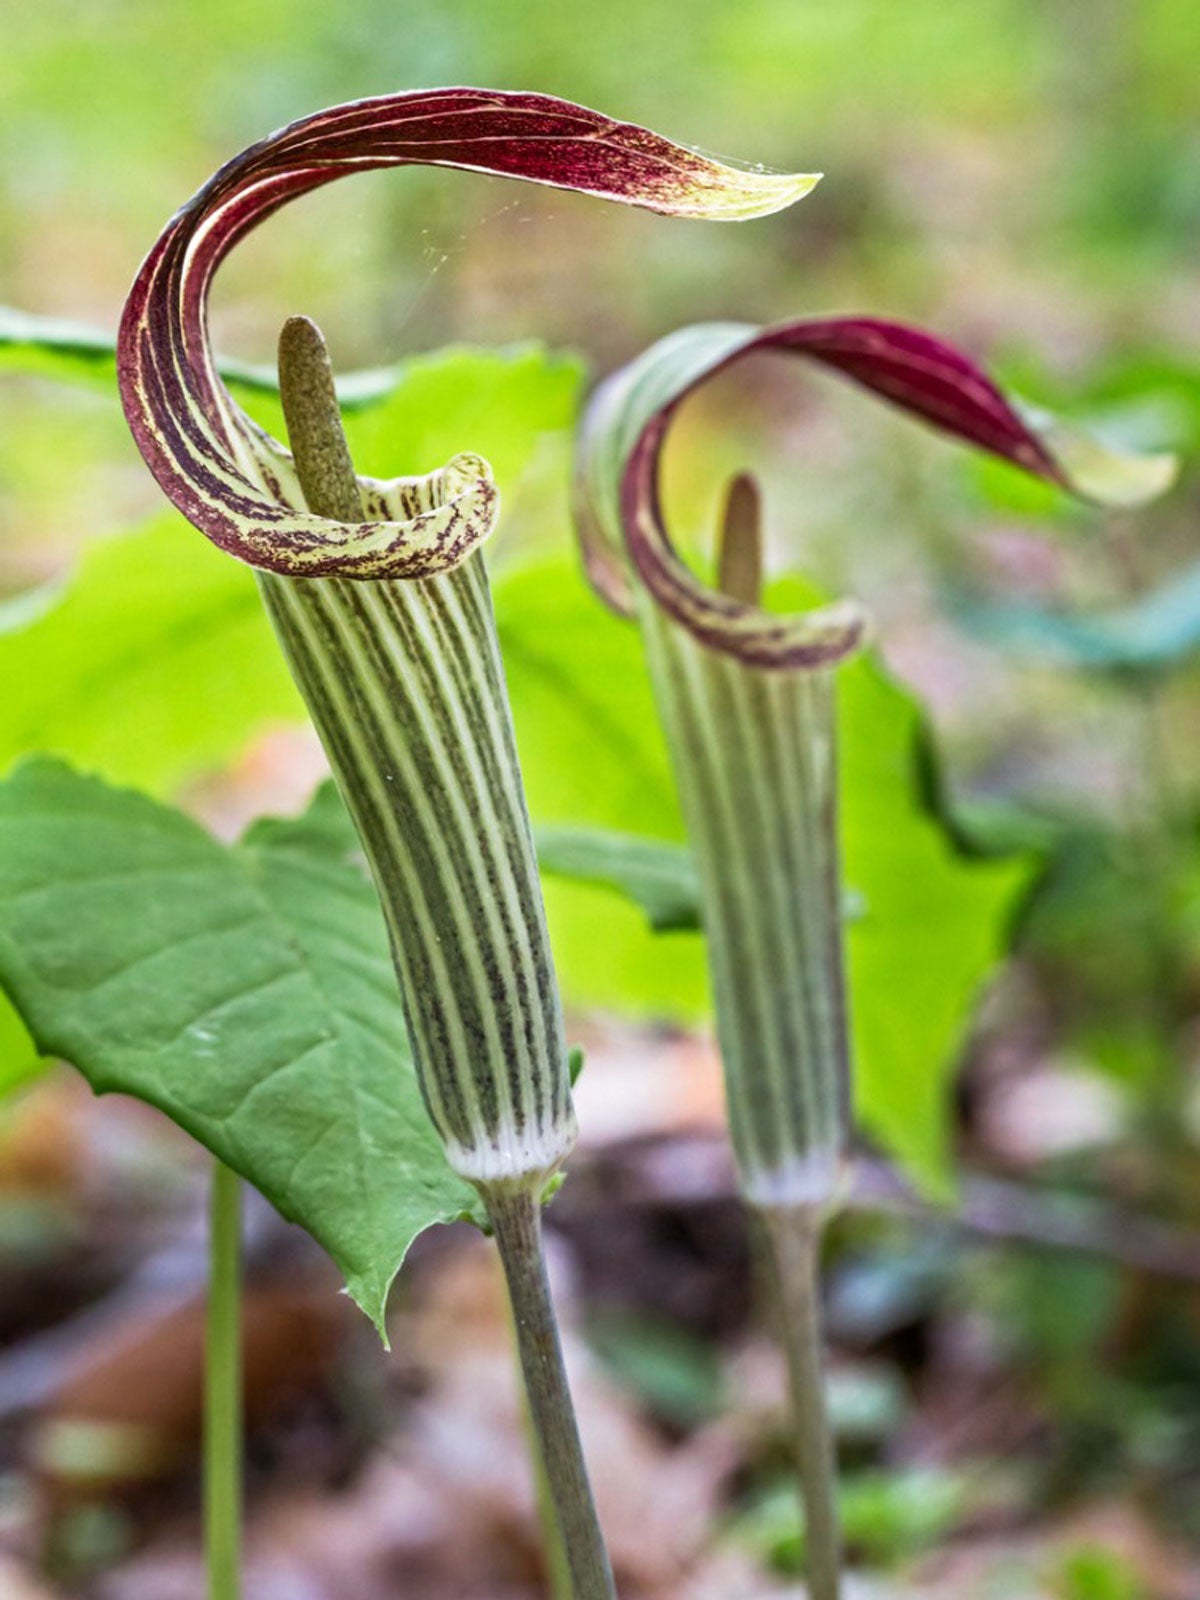 jack-in-the-pulpit propagation – how does jack-in-the-pulpit reproduce